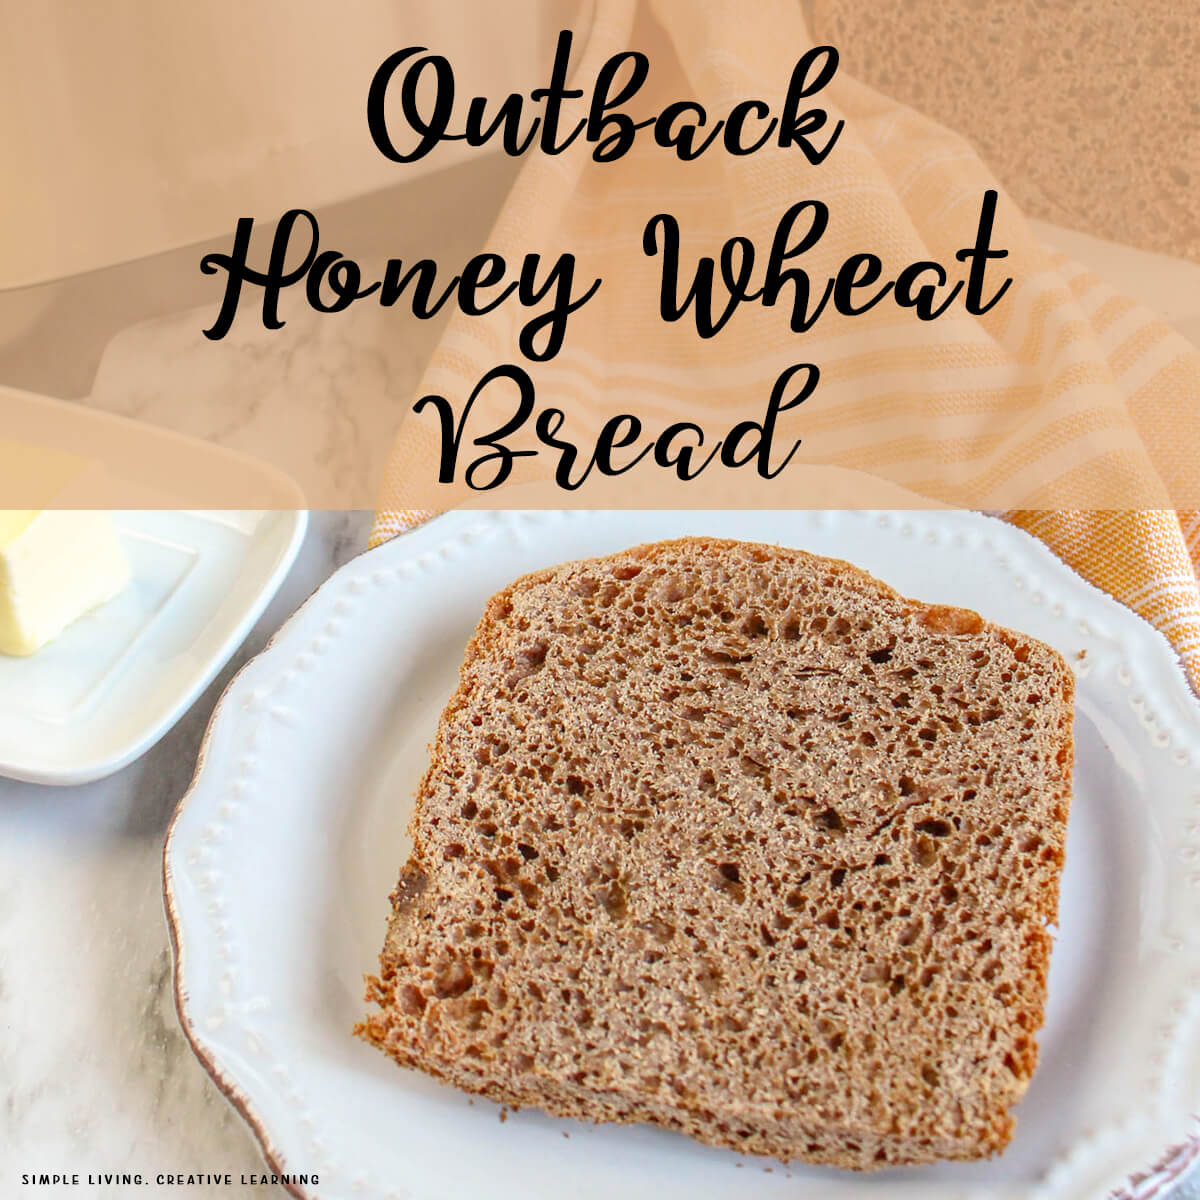 https://simplelivingcreativelearning.com/wp-content/uploads/2022/03/Outback-Honey-Wheat-Bread-2a.jpg